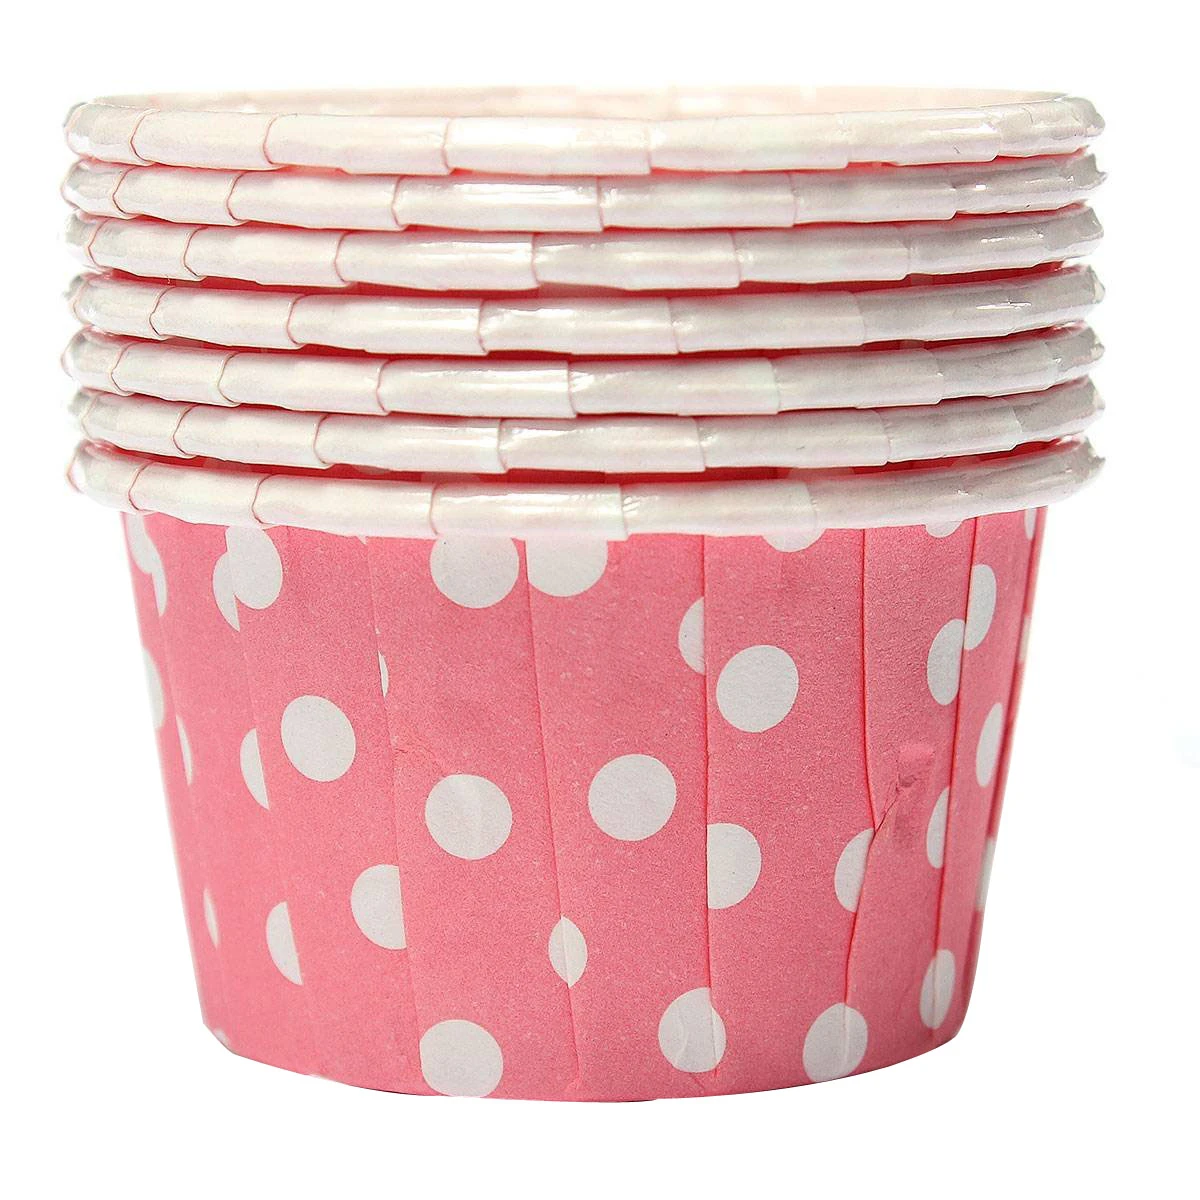 100X Cupcake Wrapper Paper Cake Case Baking Cups Liner Muffin Pink AD